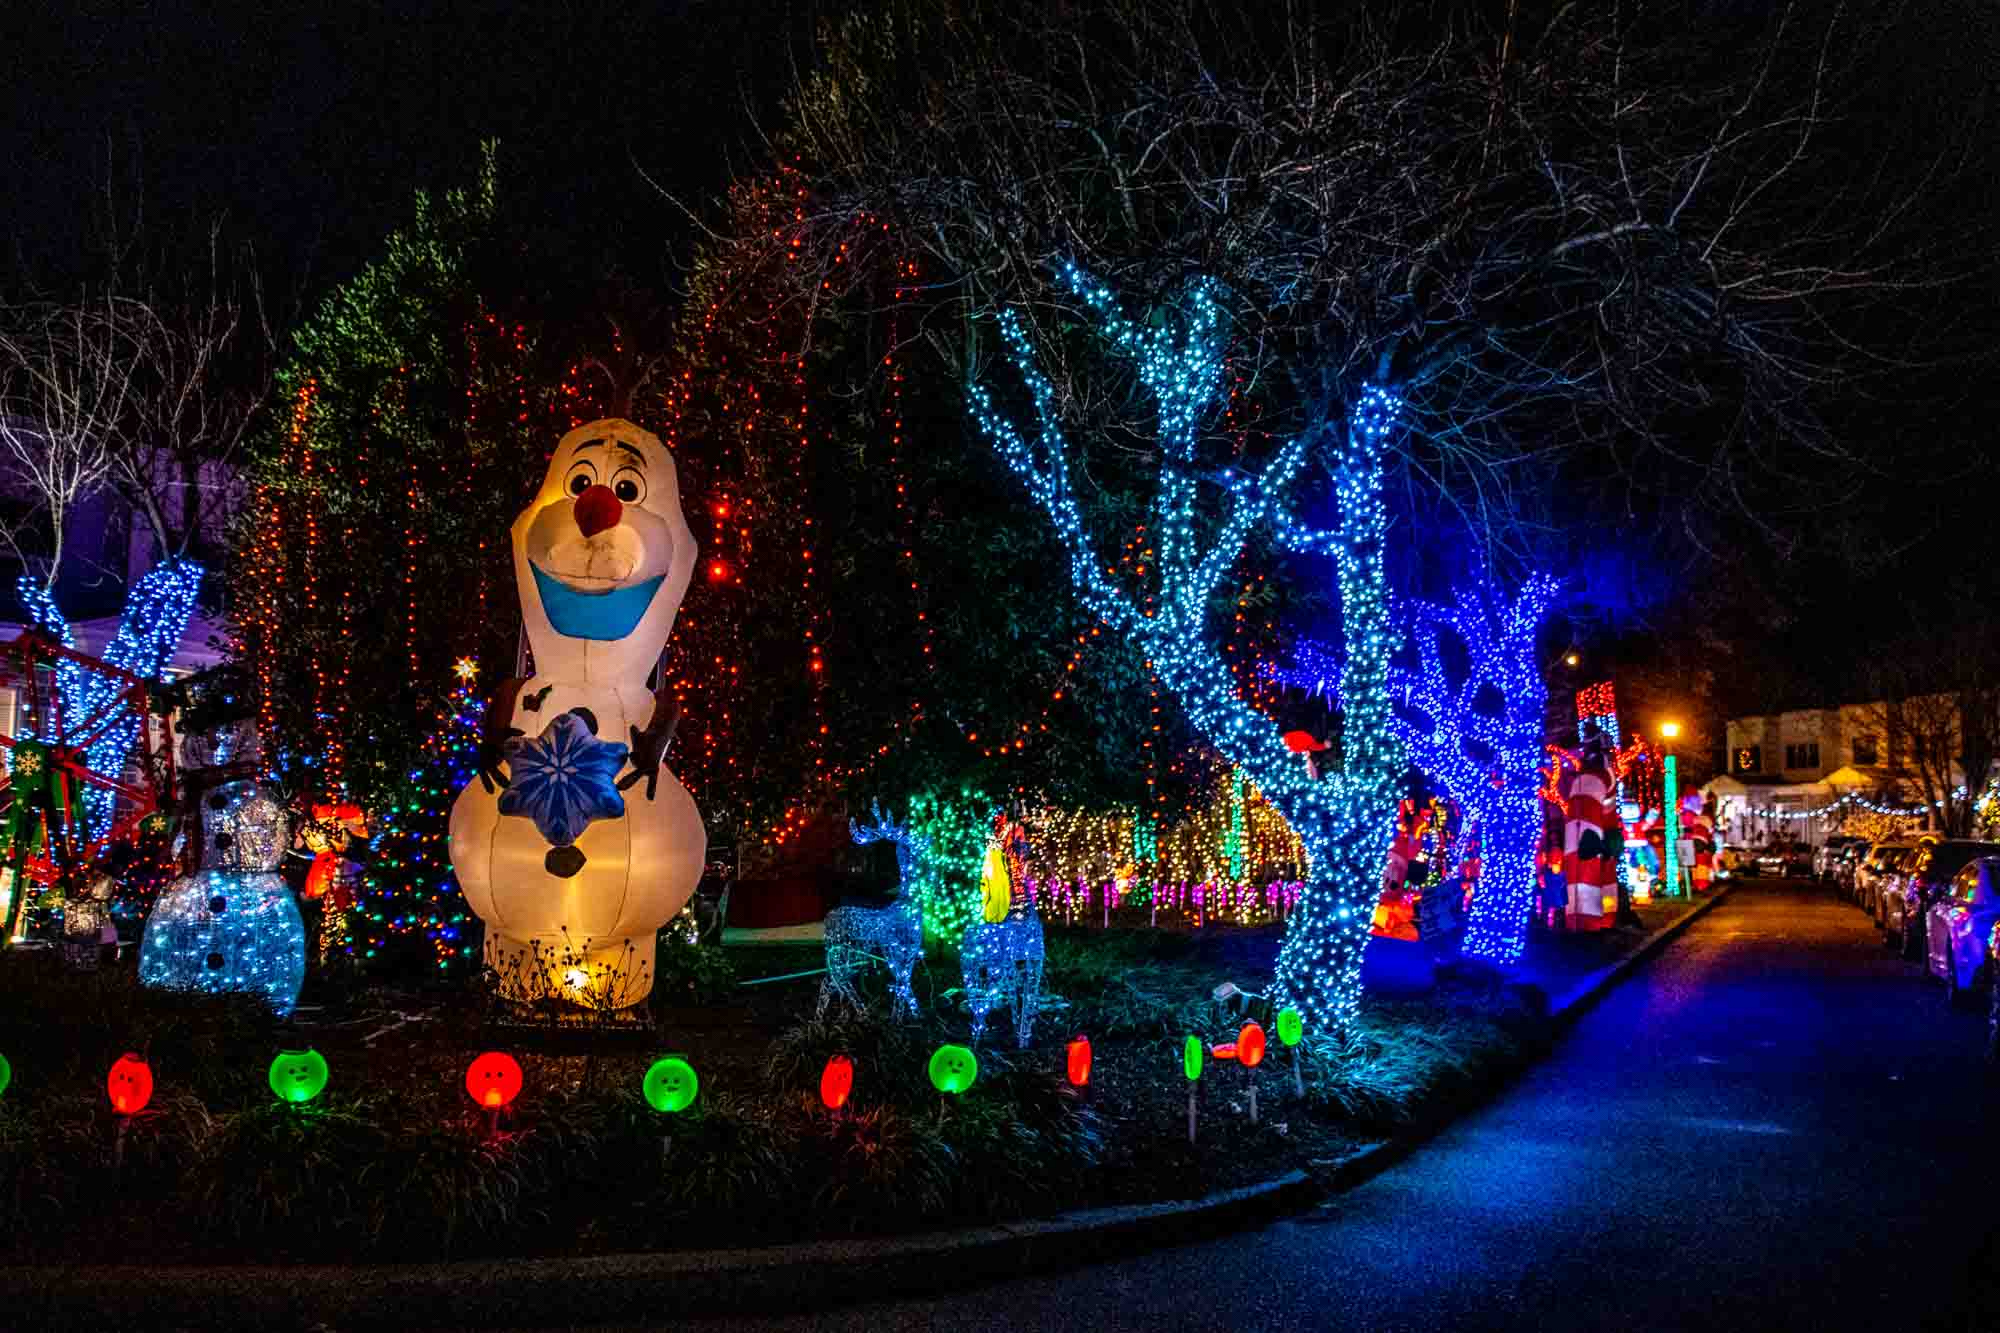 Lit up inflatable snowman beside trees covered in Christmas lights.